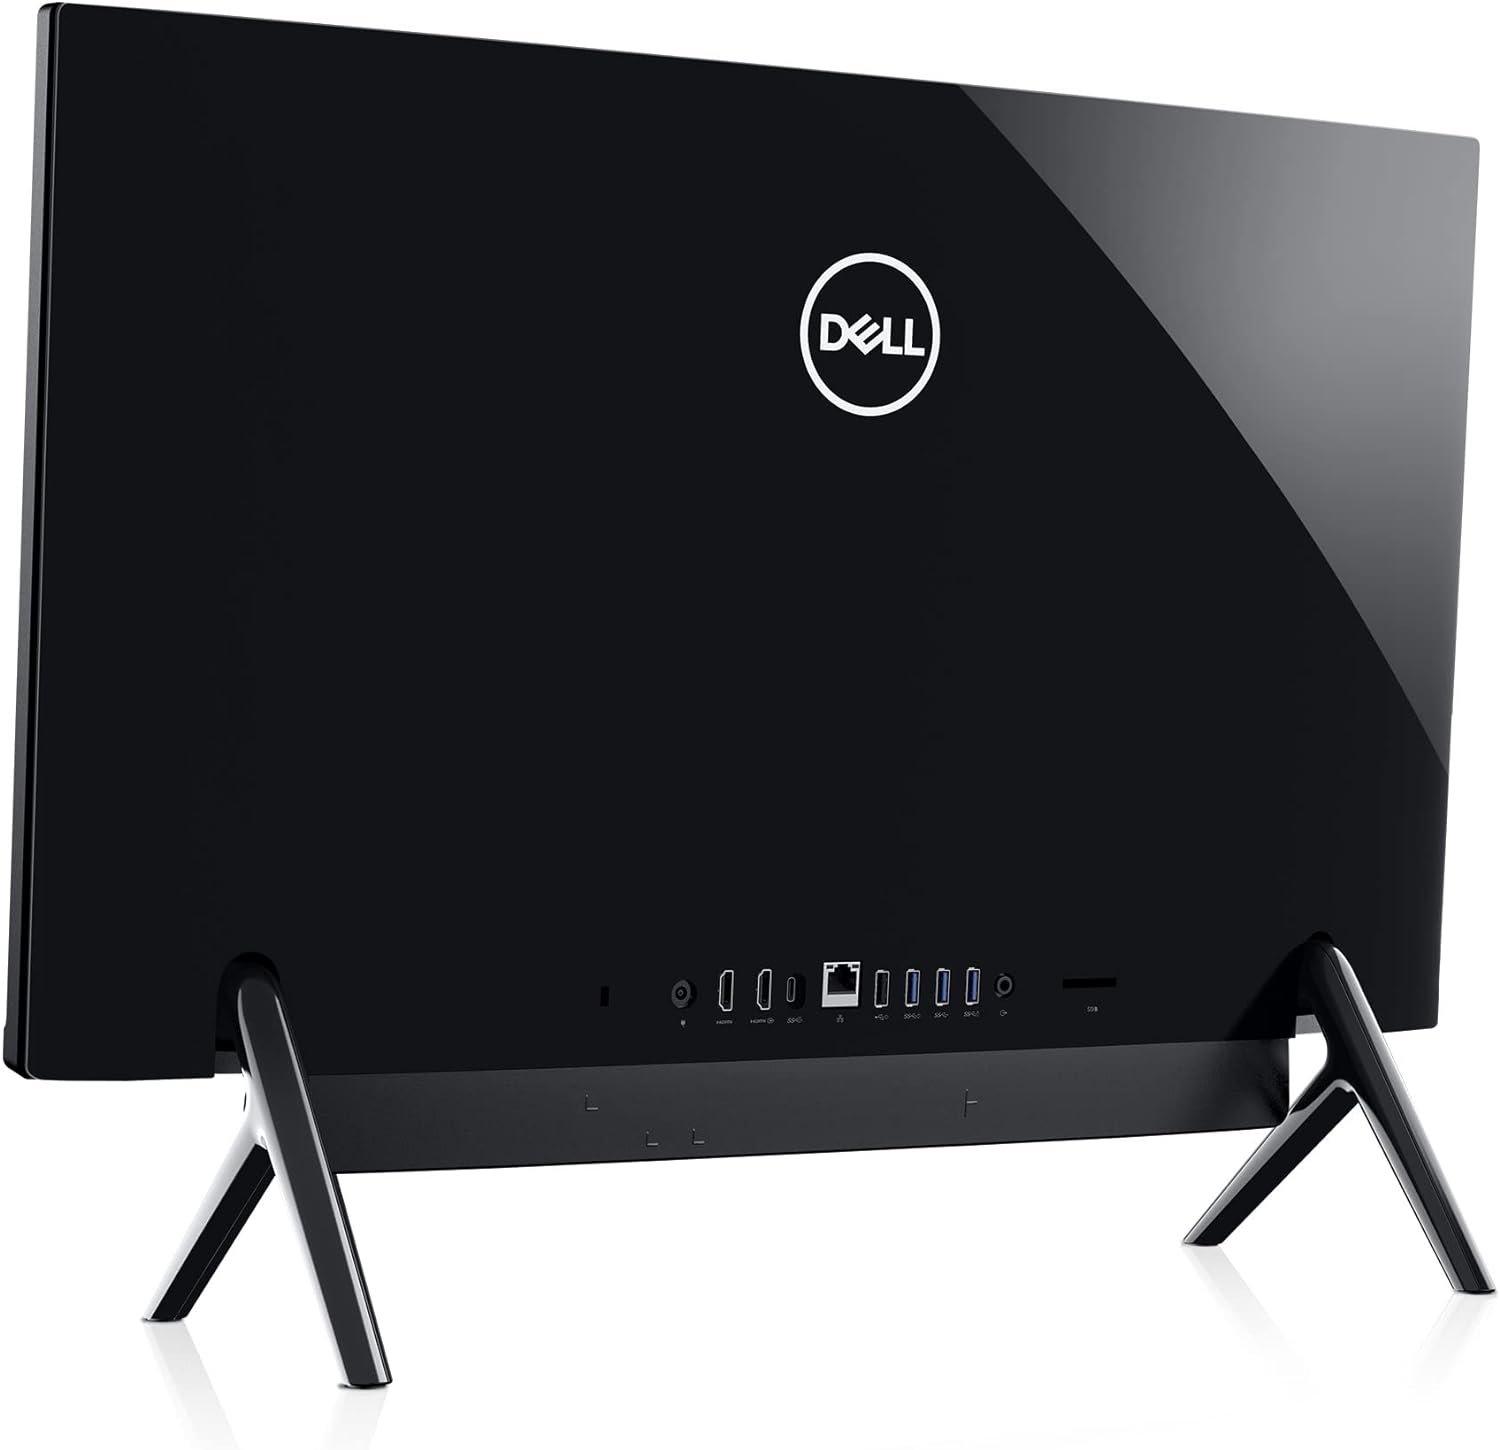 Dell Inspiron 7700 27-inch All in One Desktop Computer - FHD (1920 x 1080) Display - $779